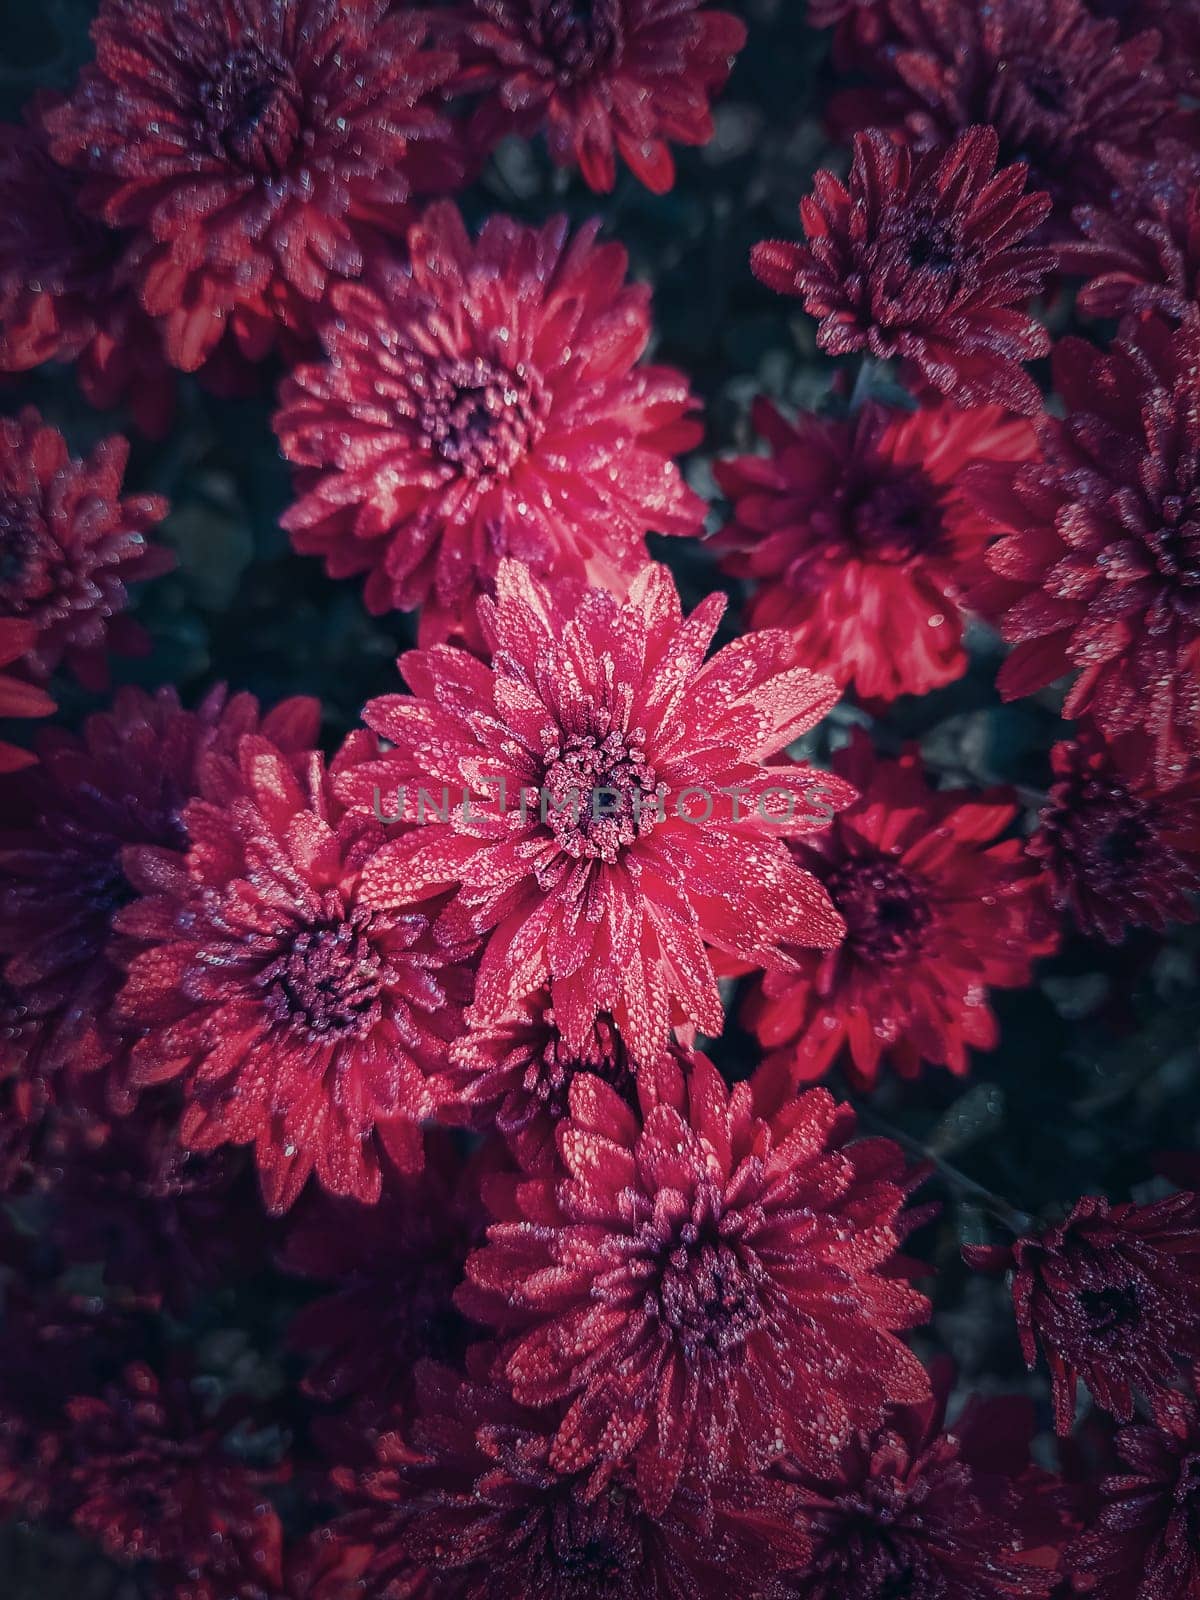 Top view red chrysanthemum texture. Beautiful flowers in the garden with morning dew drops on the petals. Maroon floral pattern by psychoshadow